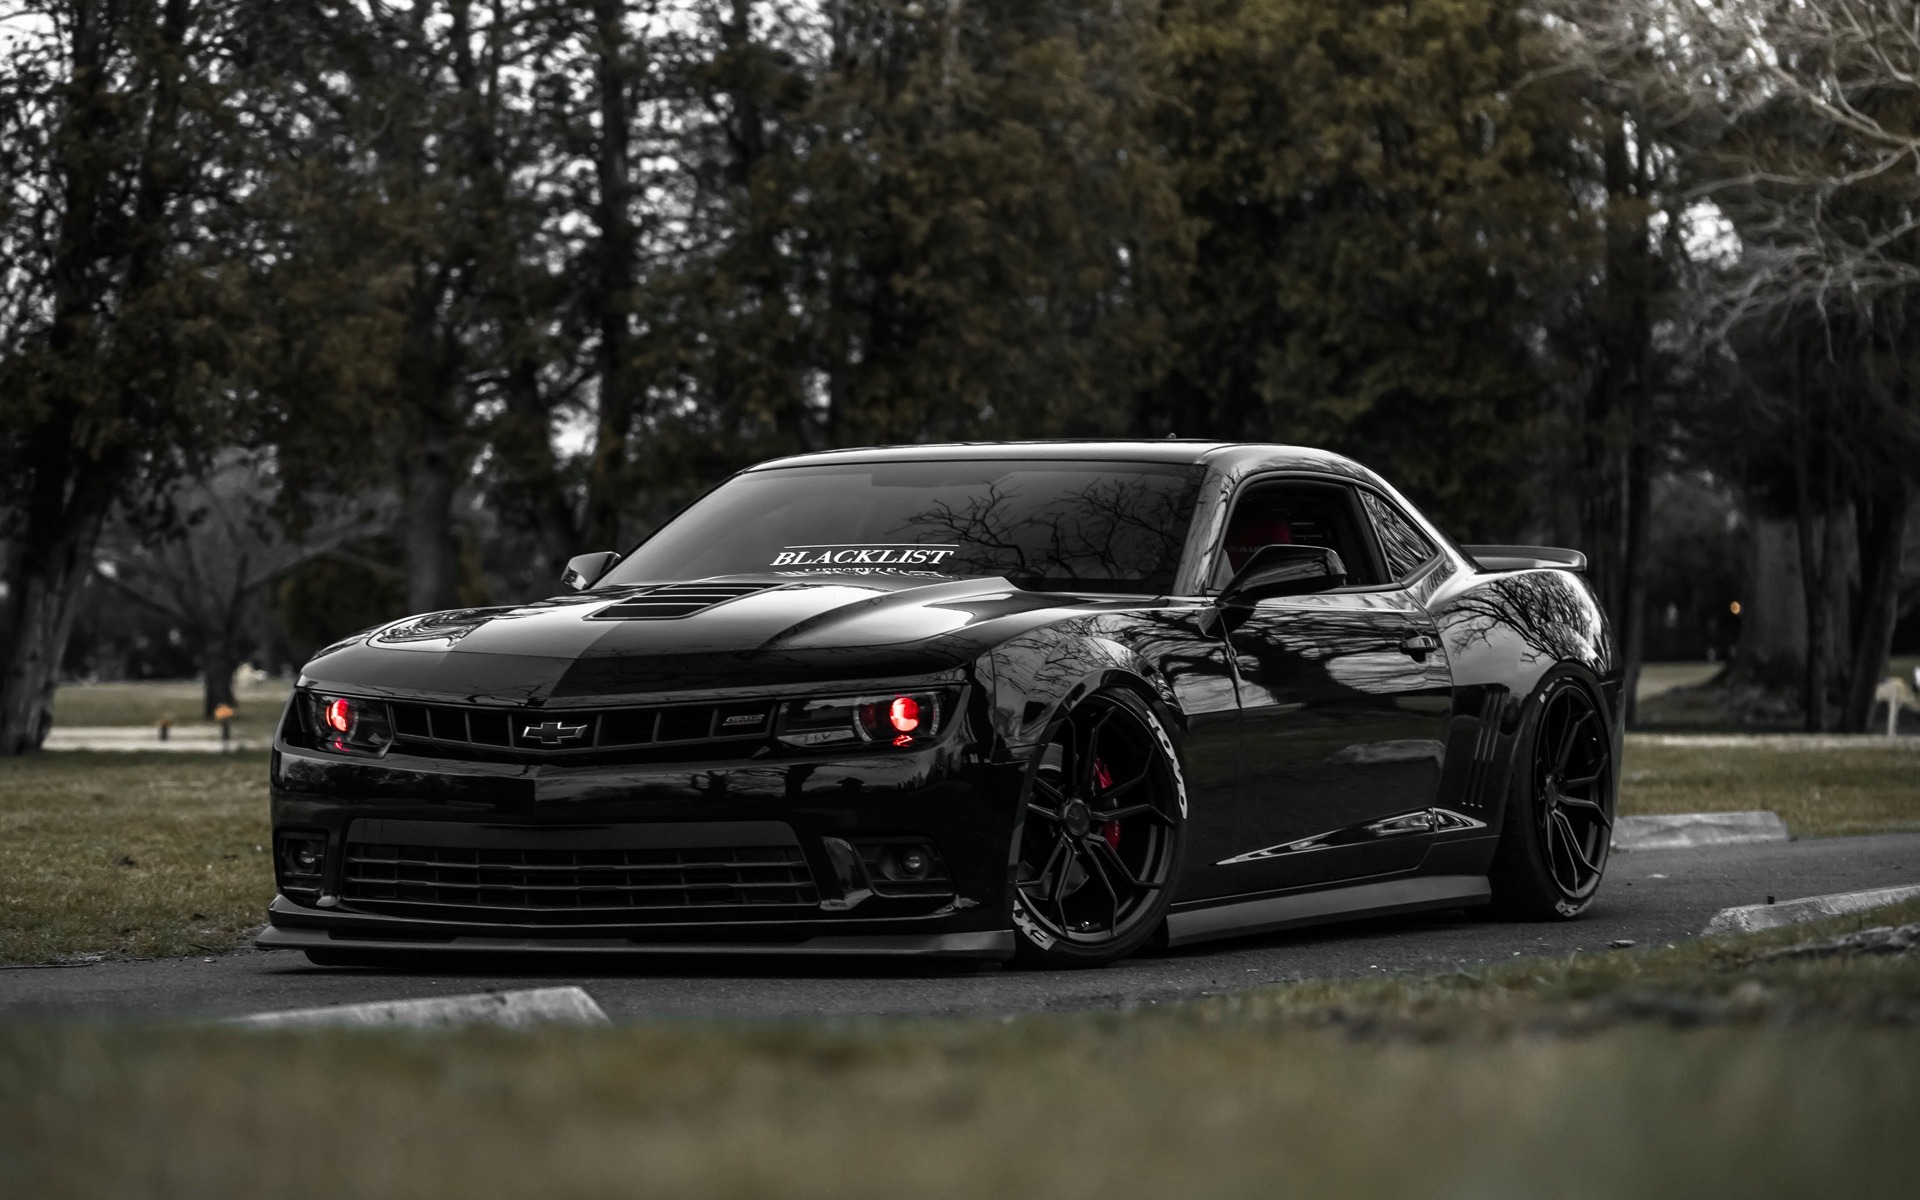 Download wallpapers chevrolet camaro, black supercar, tuning camaro, black  wheels, avant garde wheels for desktop with resolution 1920x1200. High  Quality HD pictures wallpapers